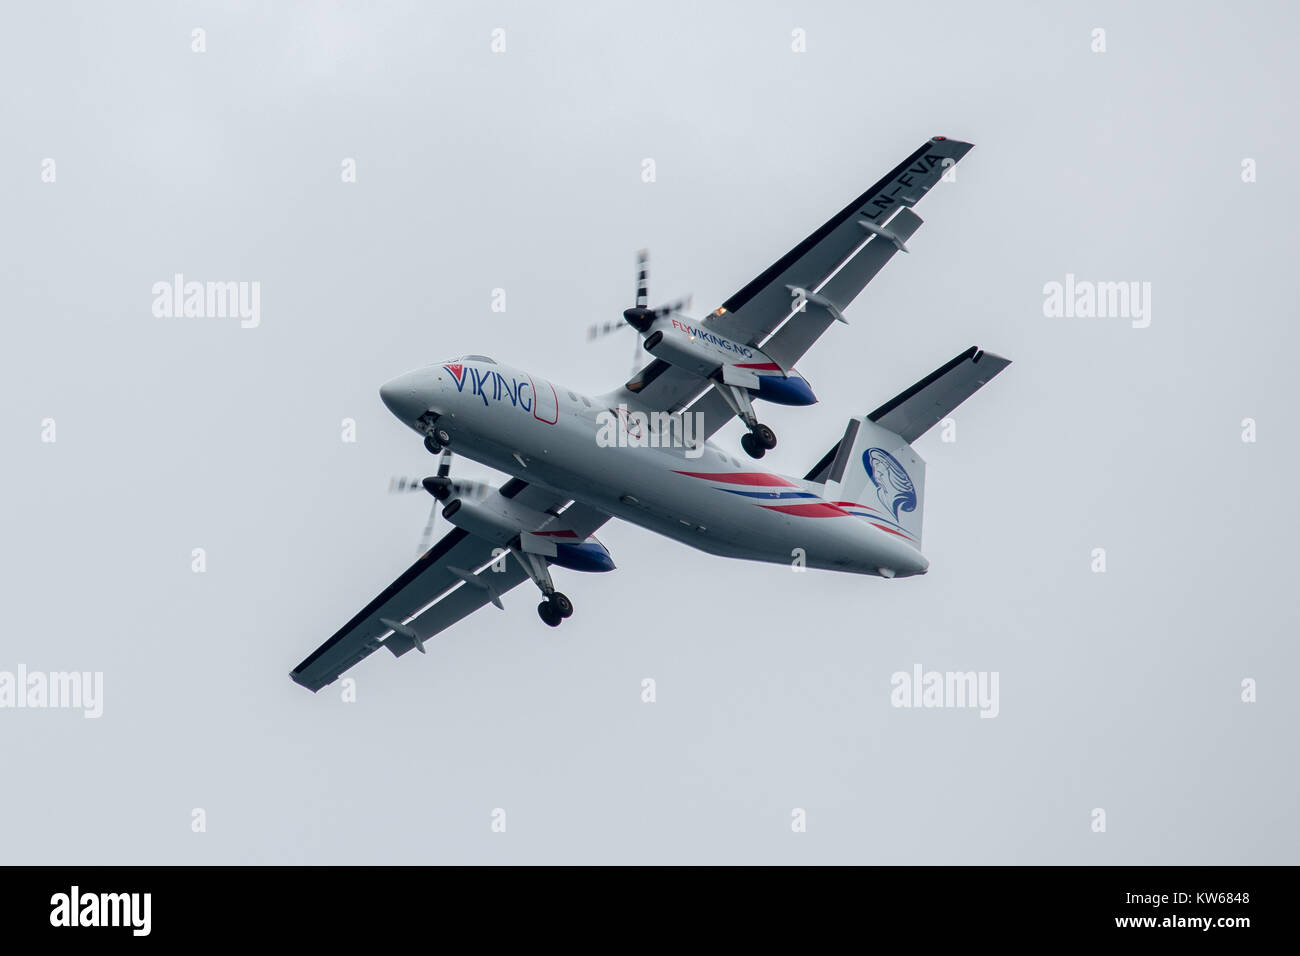 Stokmarknes Norway July 12 17 A Bombardier Dash 8 100 Plane In Stock Photo Alamy